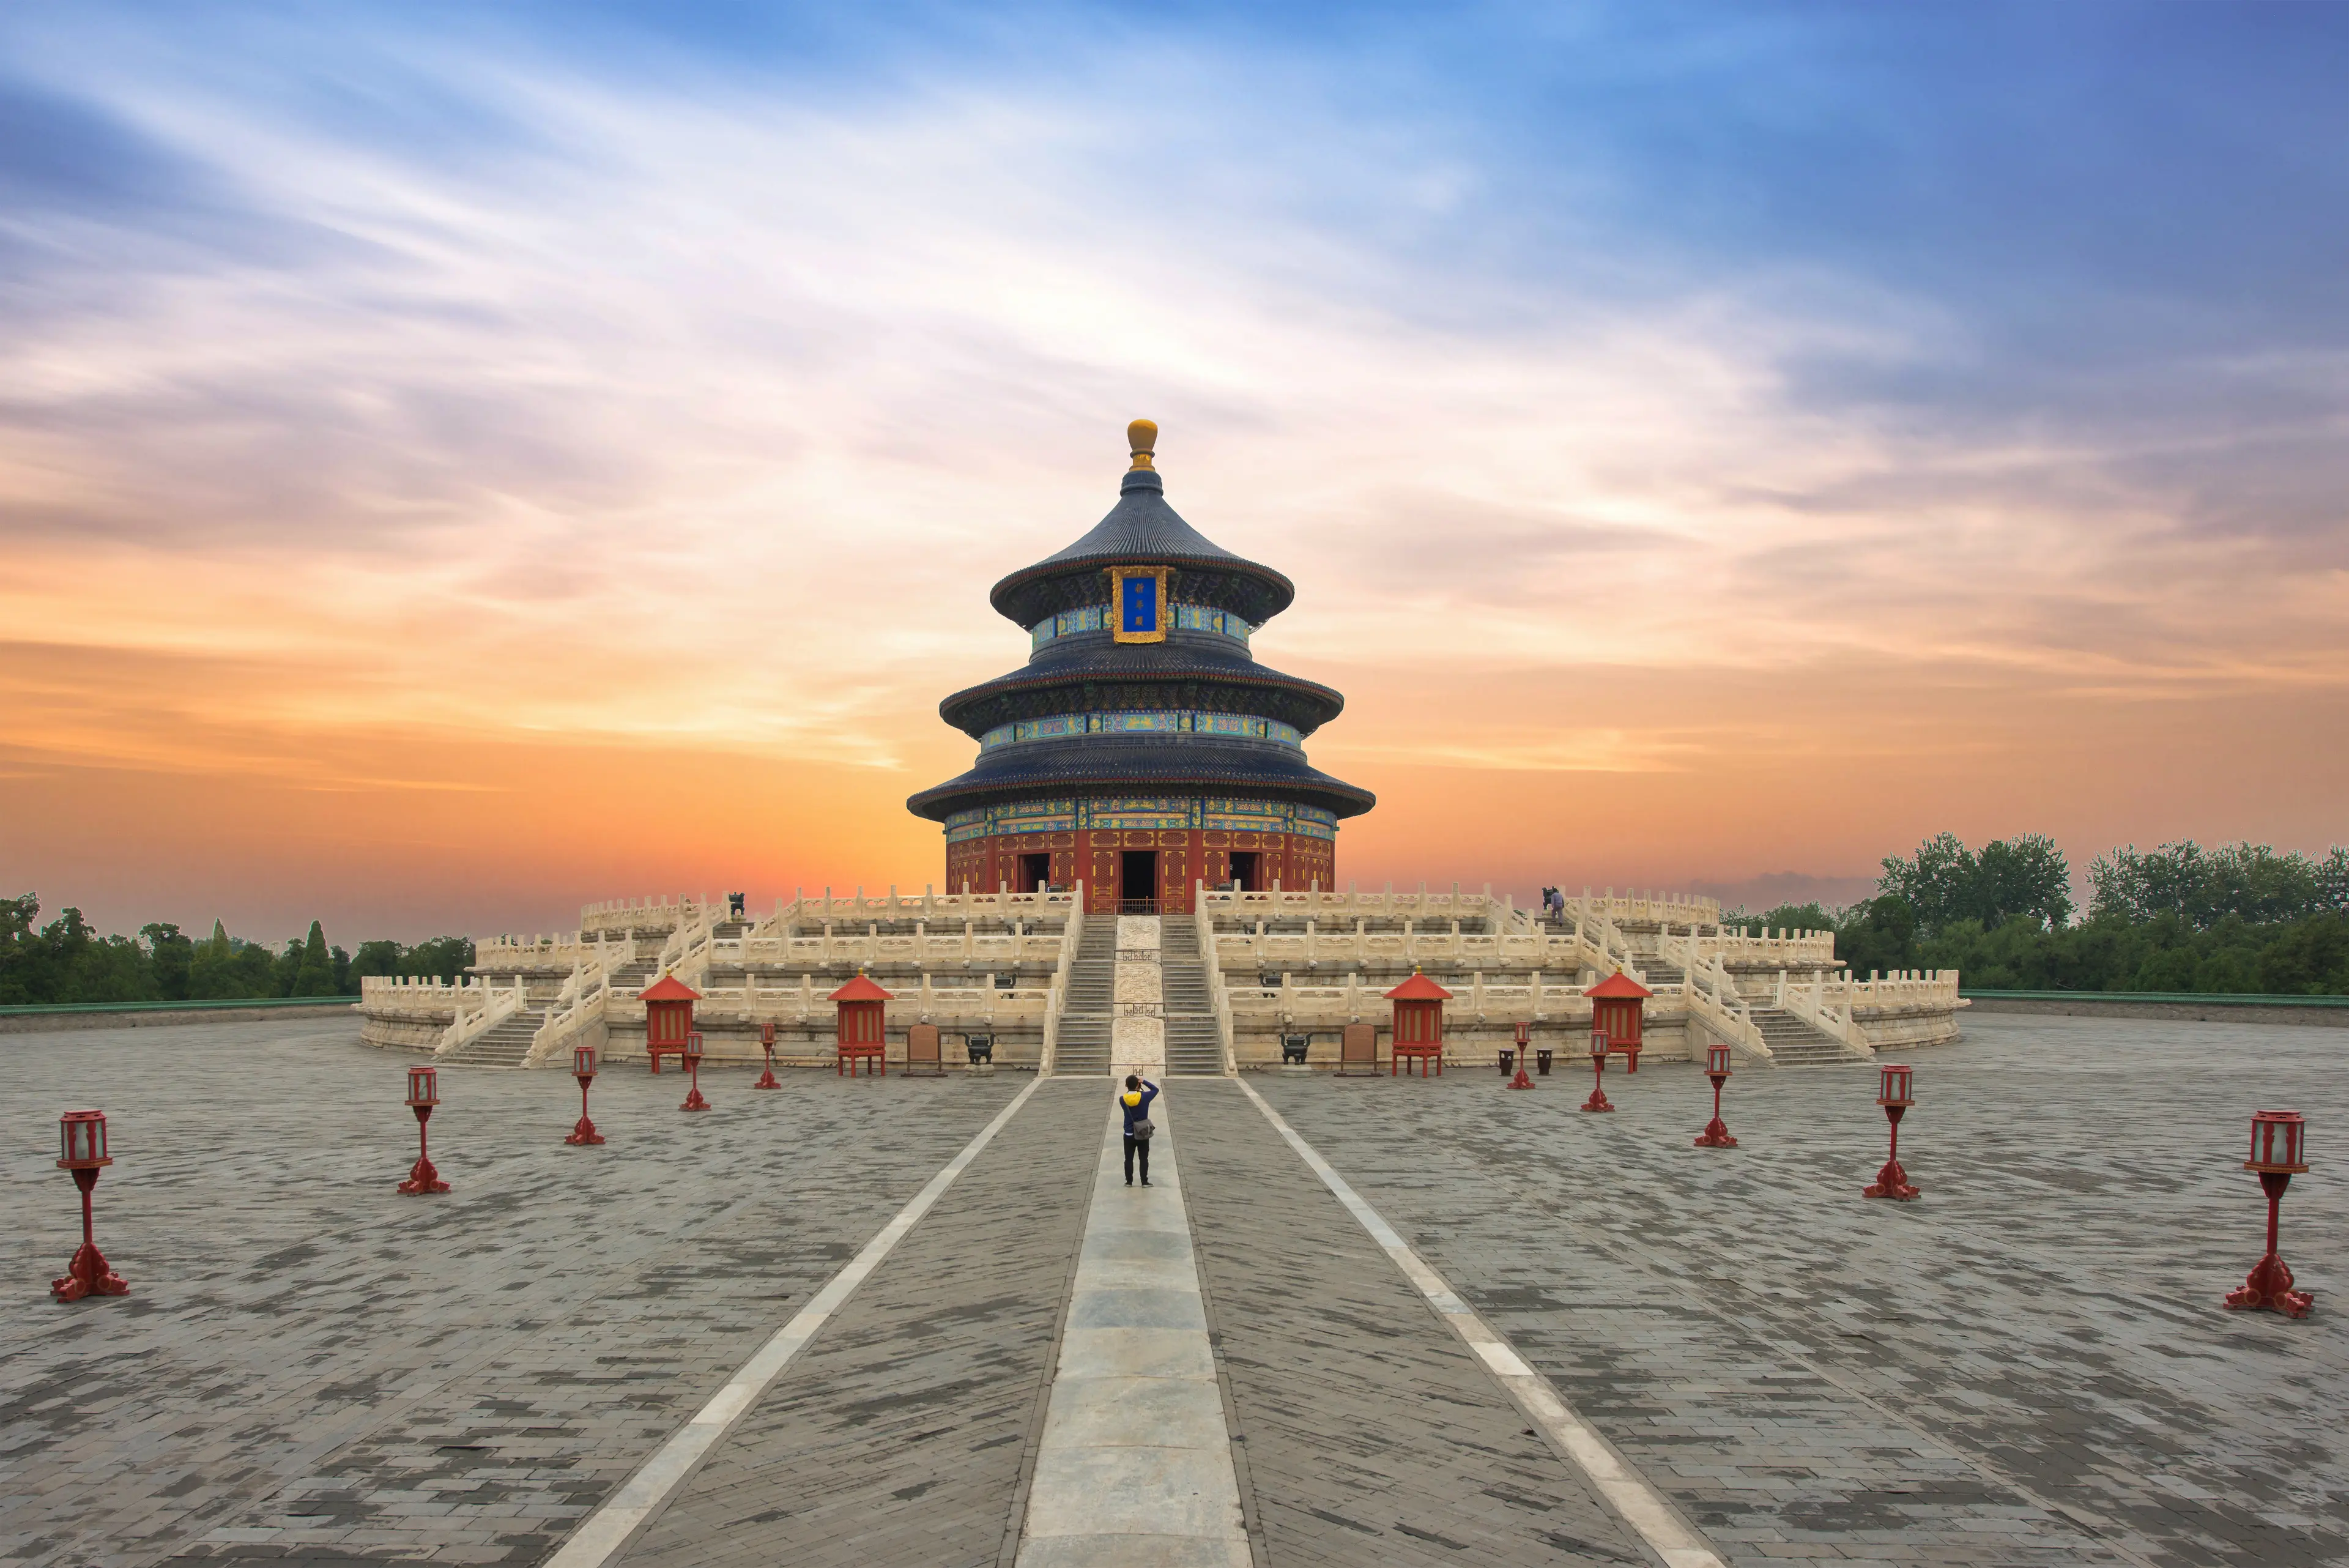 Temple of Heaven, hall of Prayer for Good Harvest